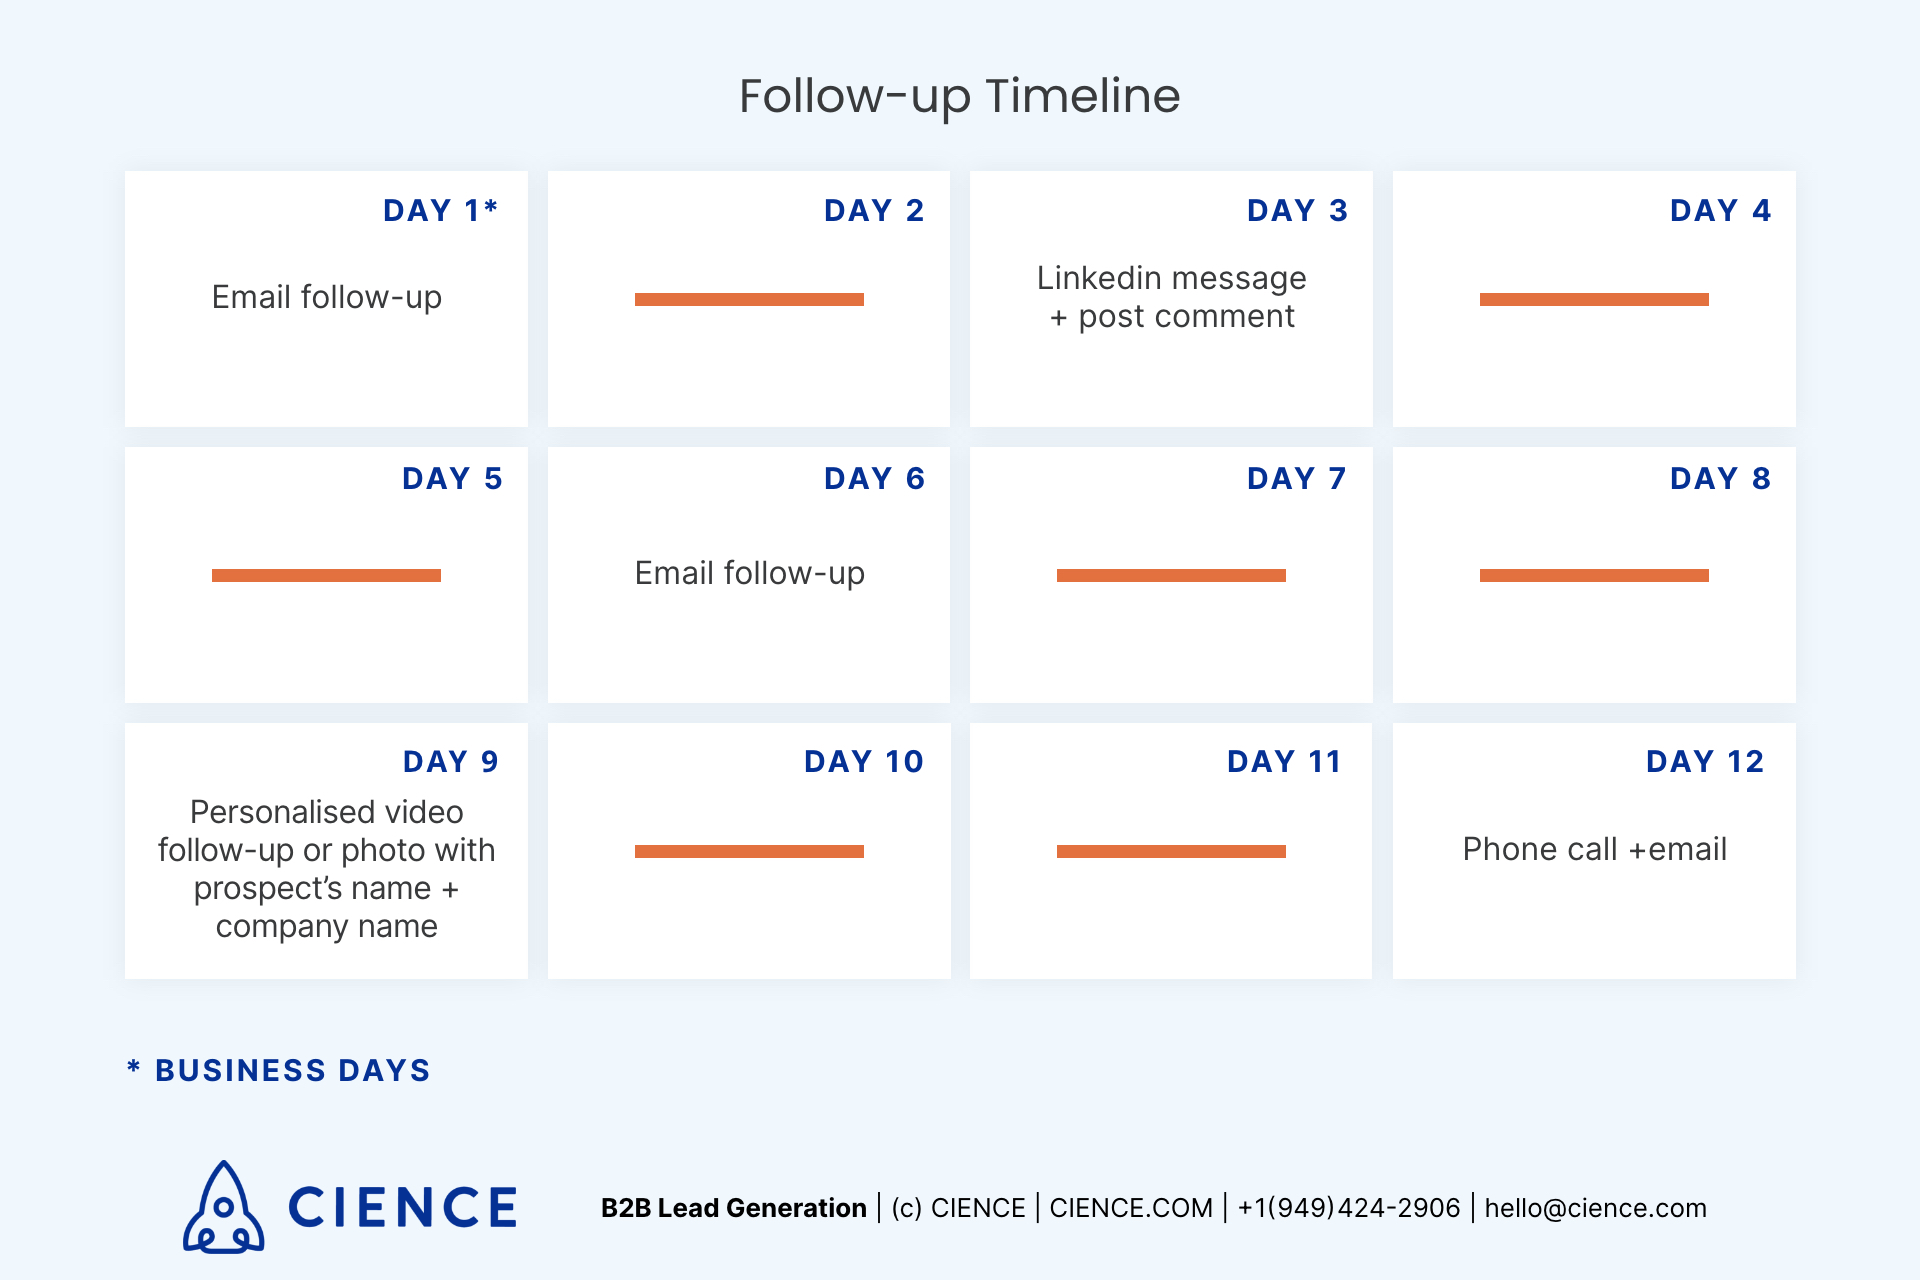 Sales follow-up timeline in business days